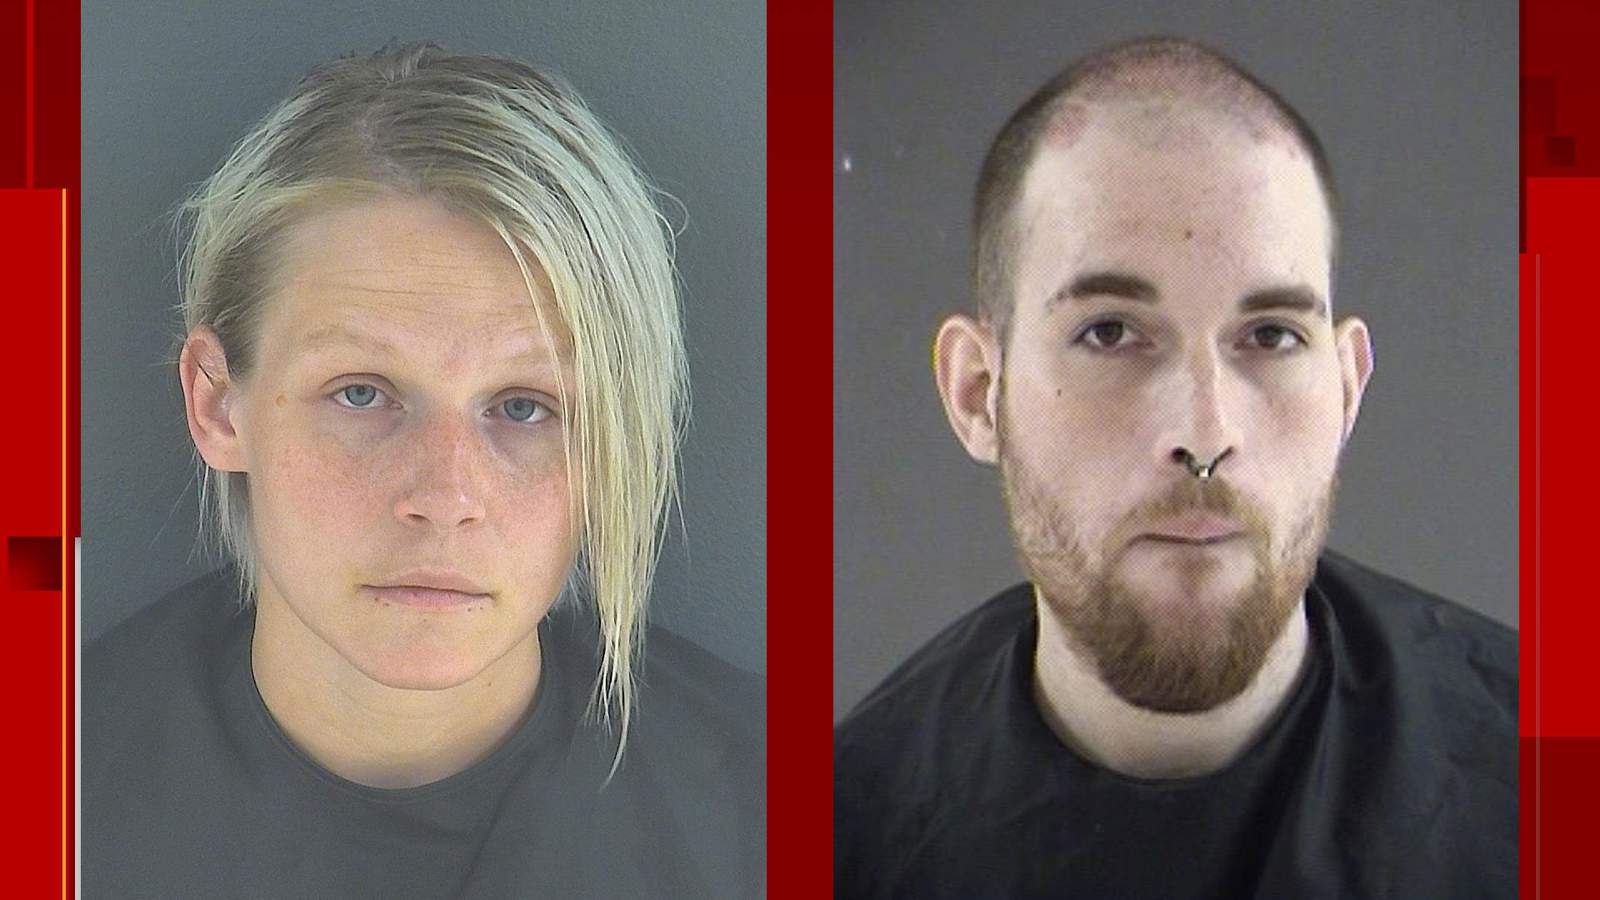 Bedford County duo faces felony charge after child found wandering outside in just a diaper